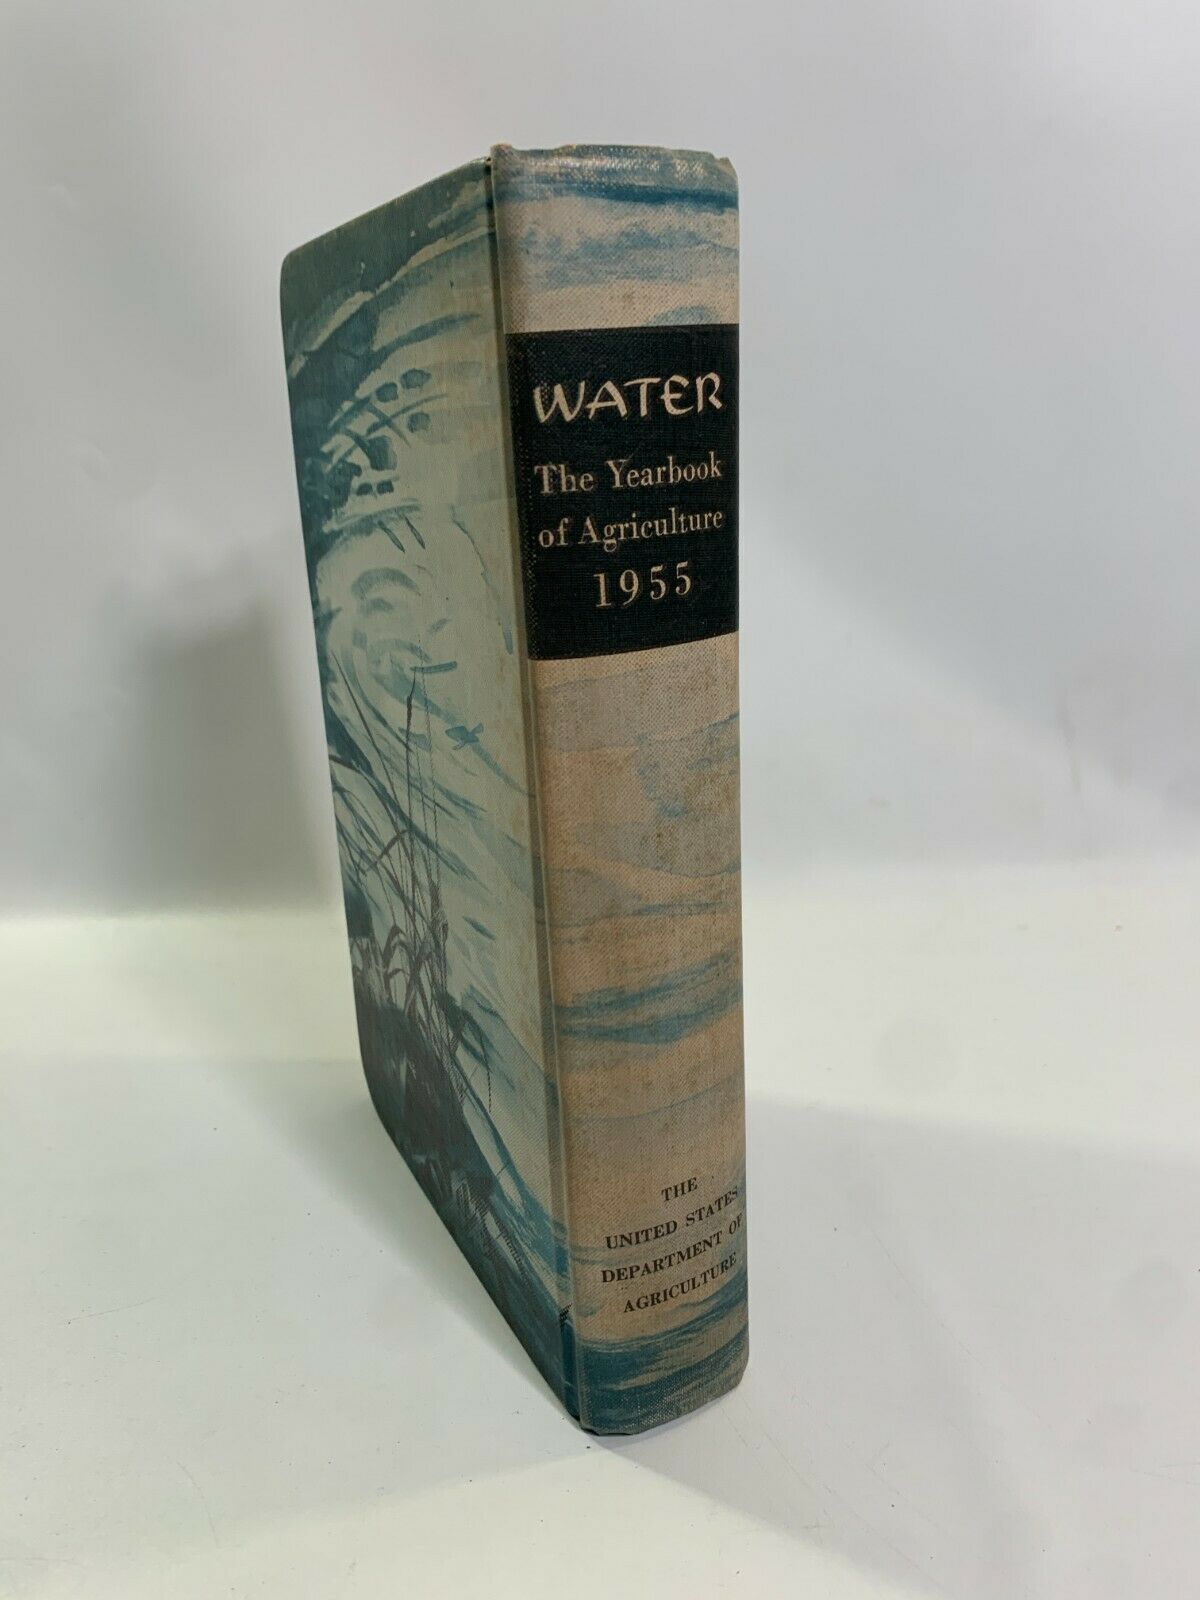 WATER - The Yearbook of Agriculture 1955